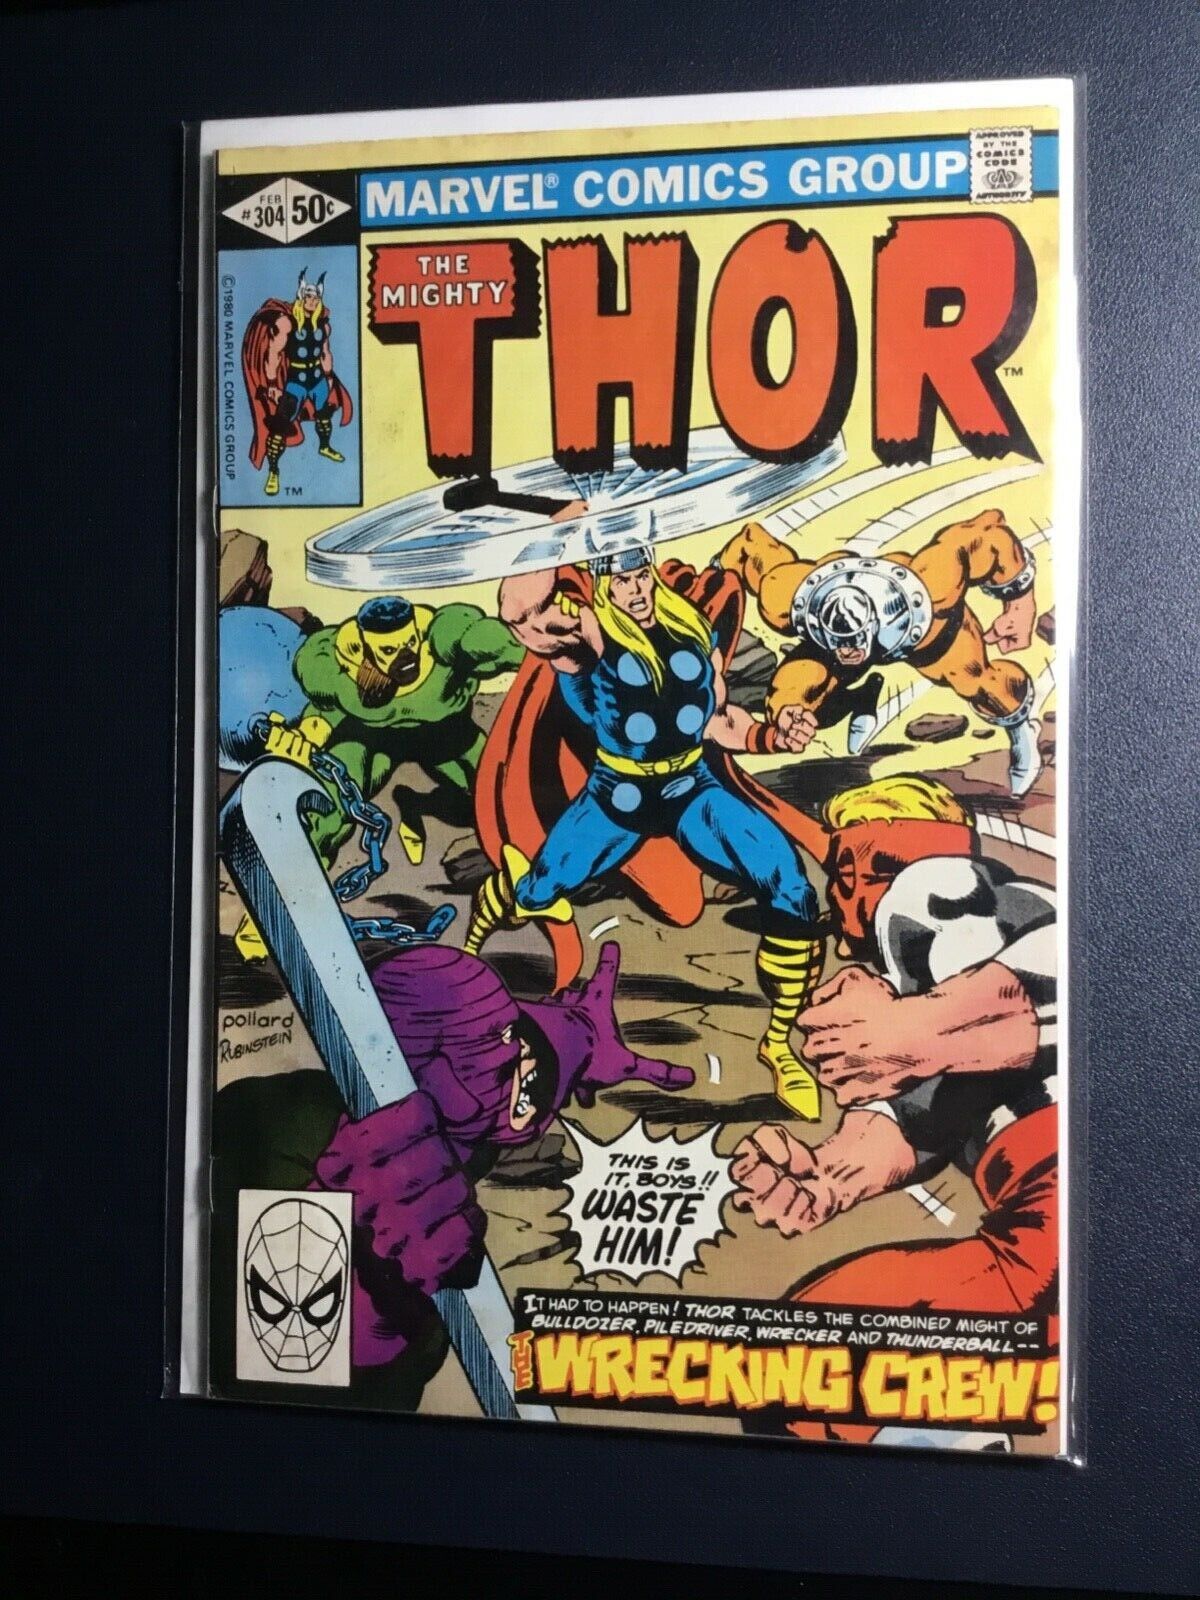 THOR #304 VG+ 4.5 (1981) IT’S THE MIGHTY THOR VERSUS THE WRECKING CREW